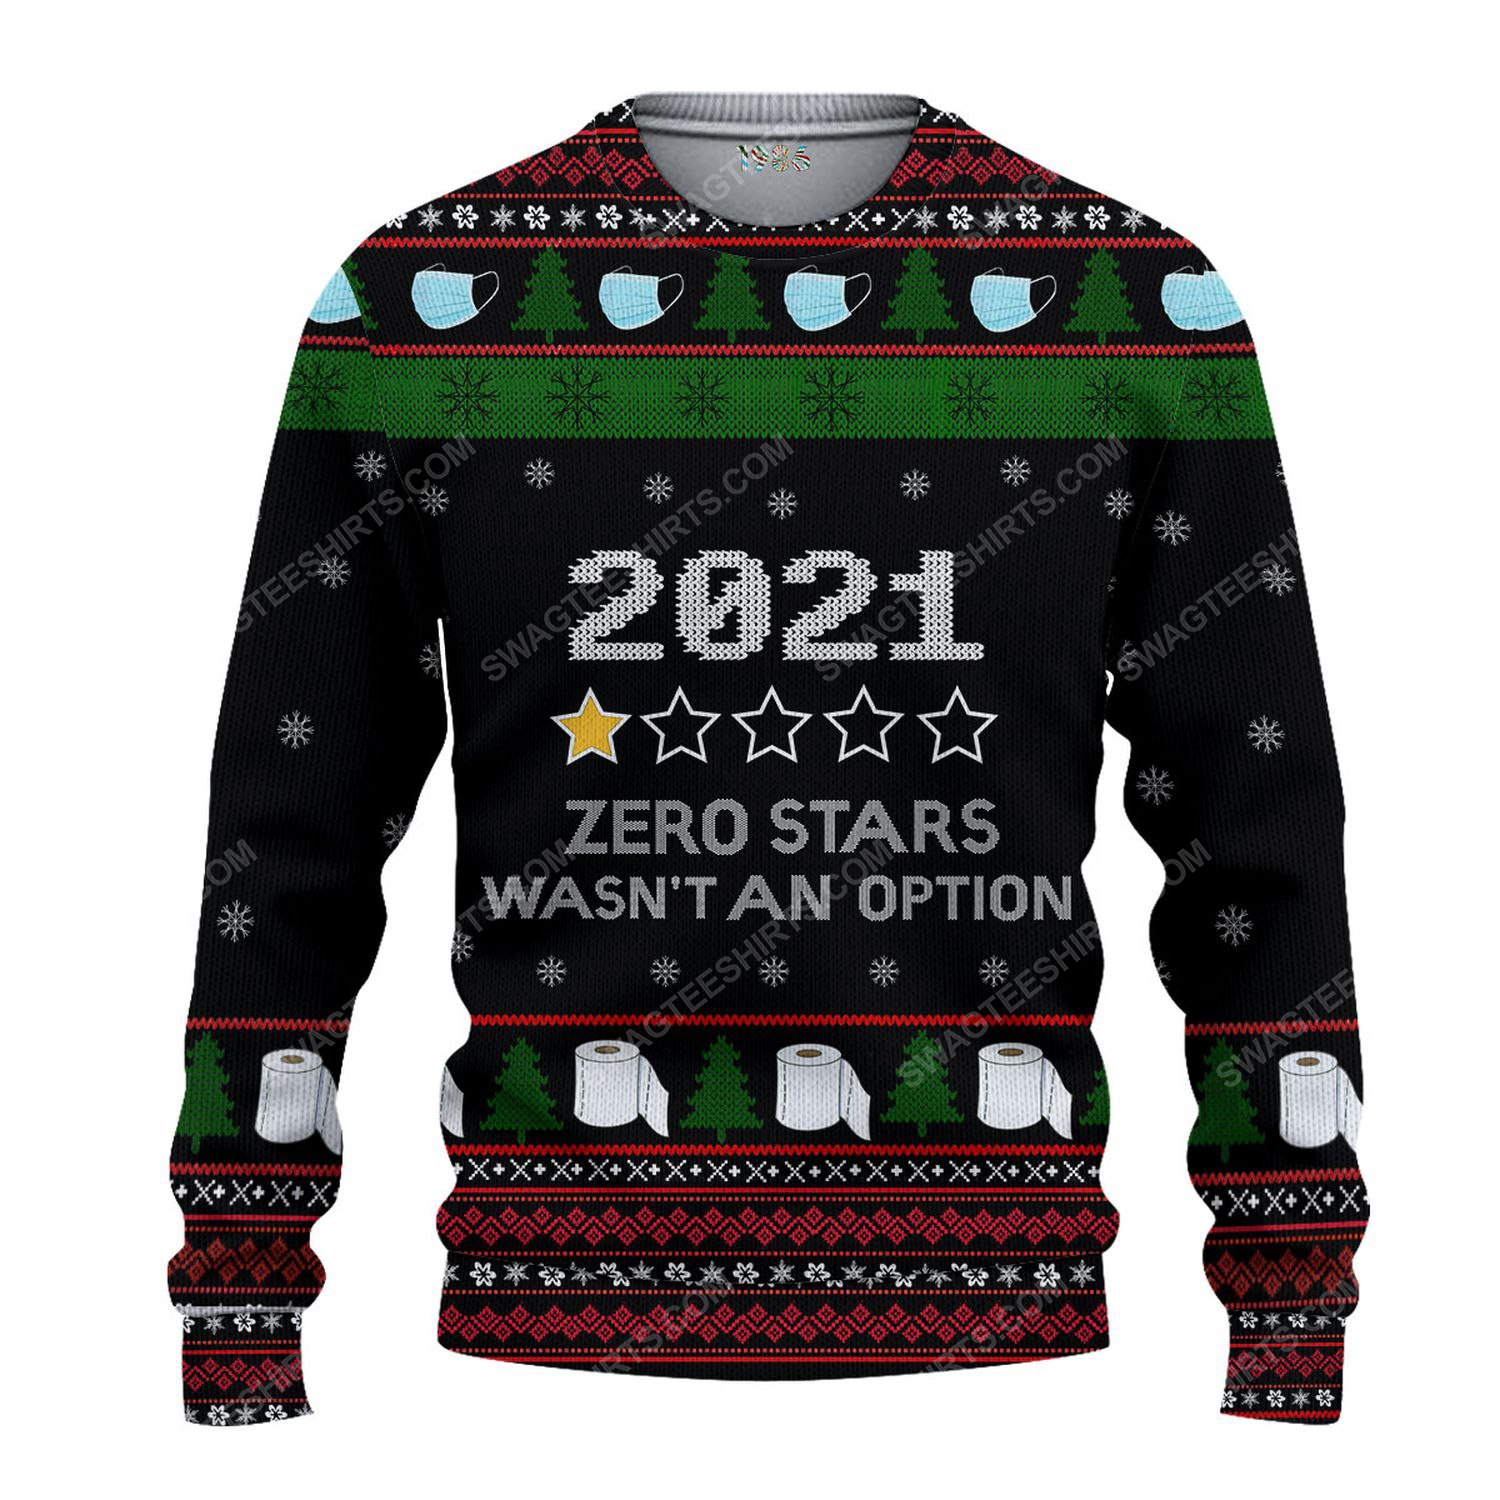 Toilet paper 2021 zero stars wasn't an option ugly christmas sweater 1 - Copy (3)